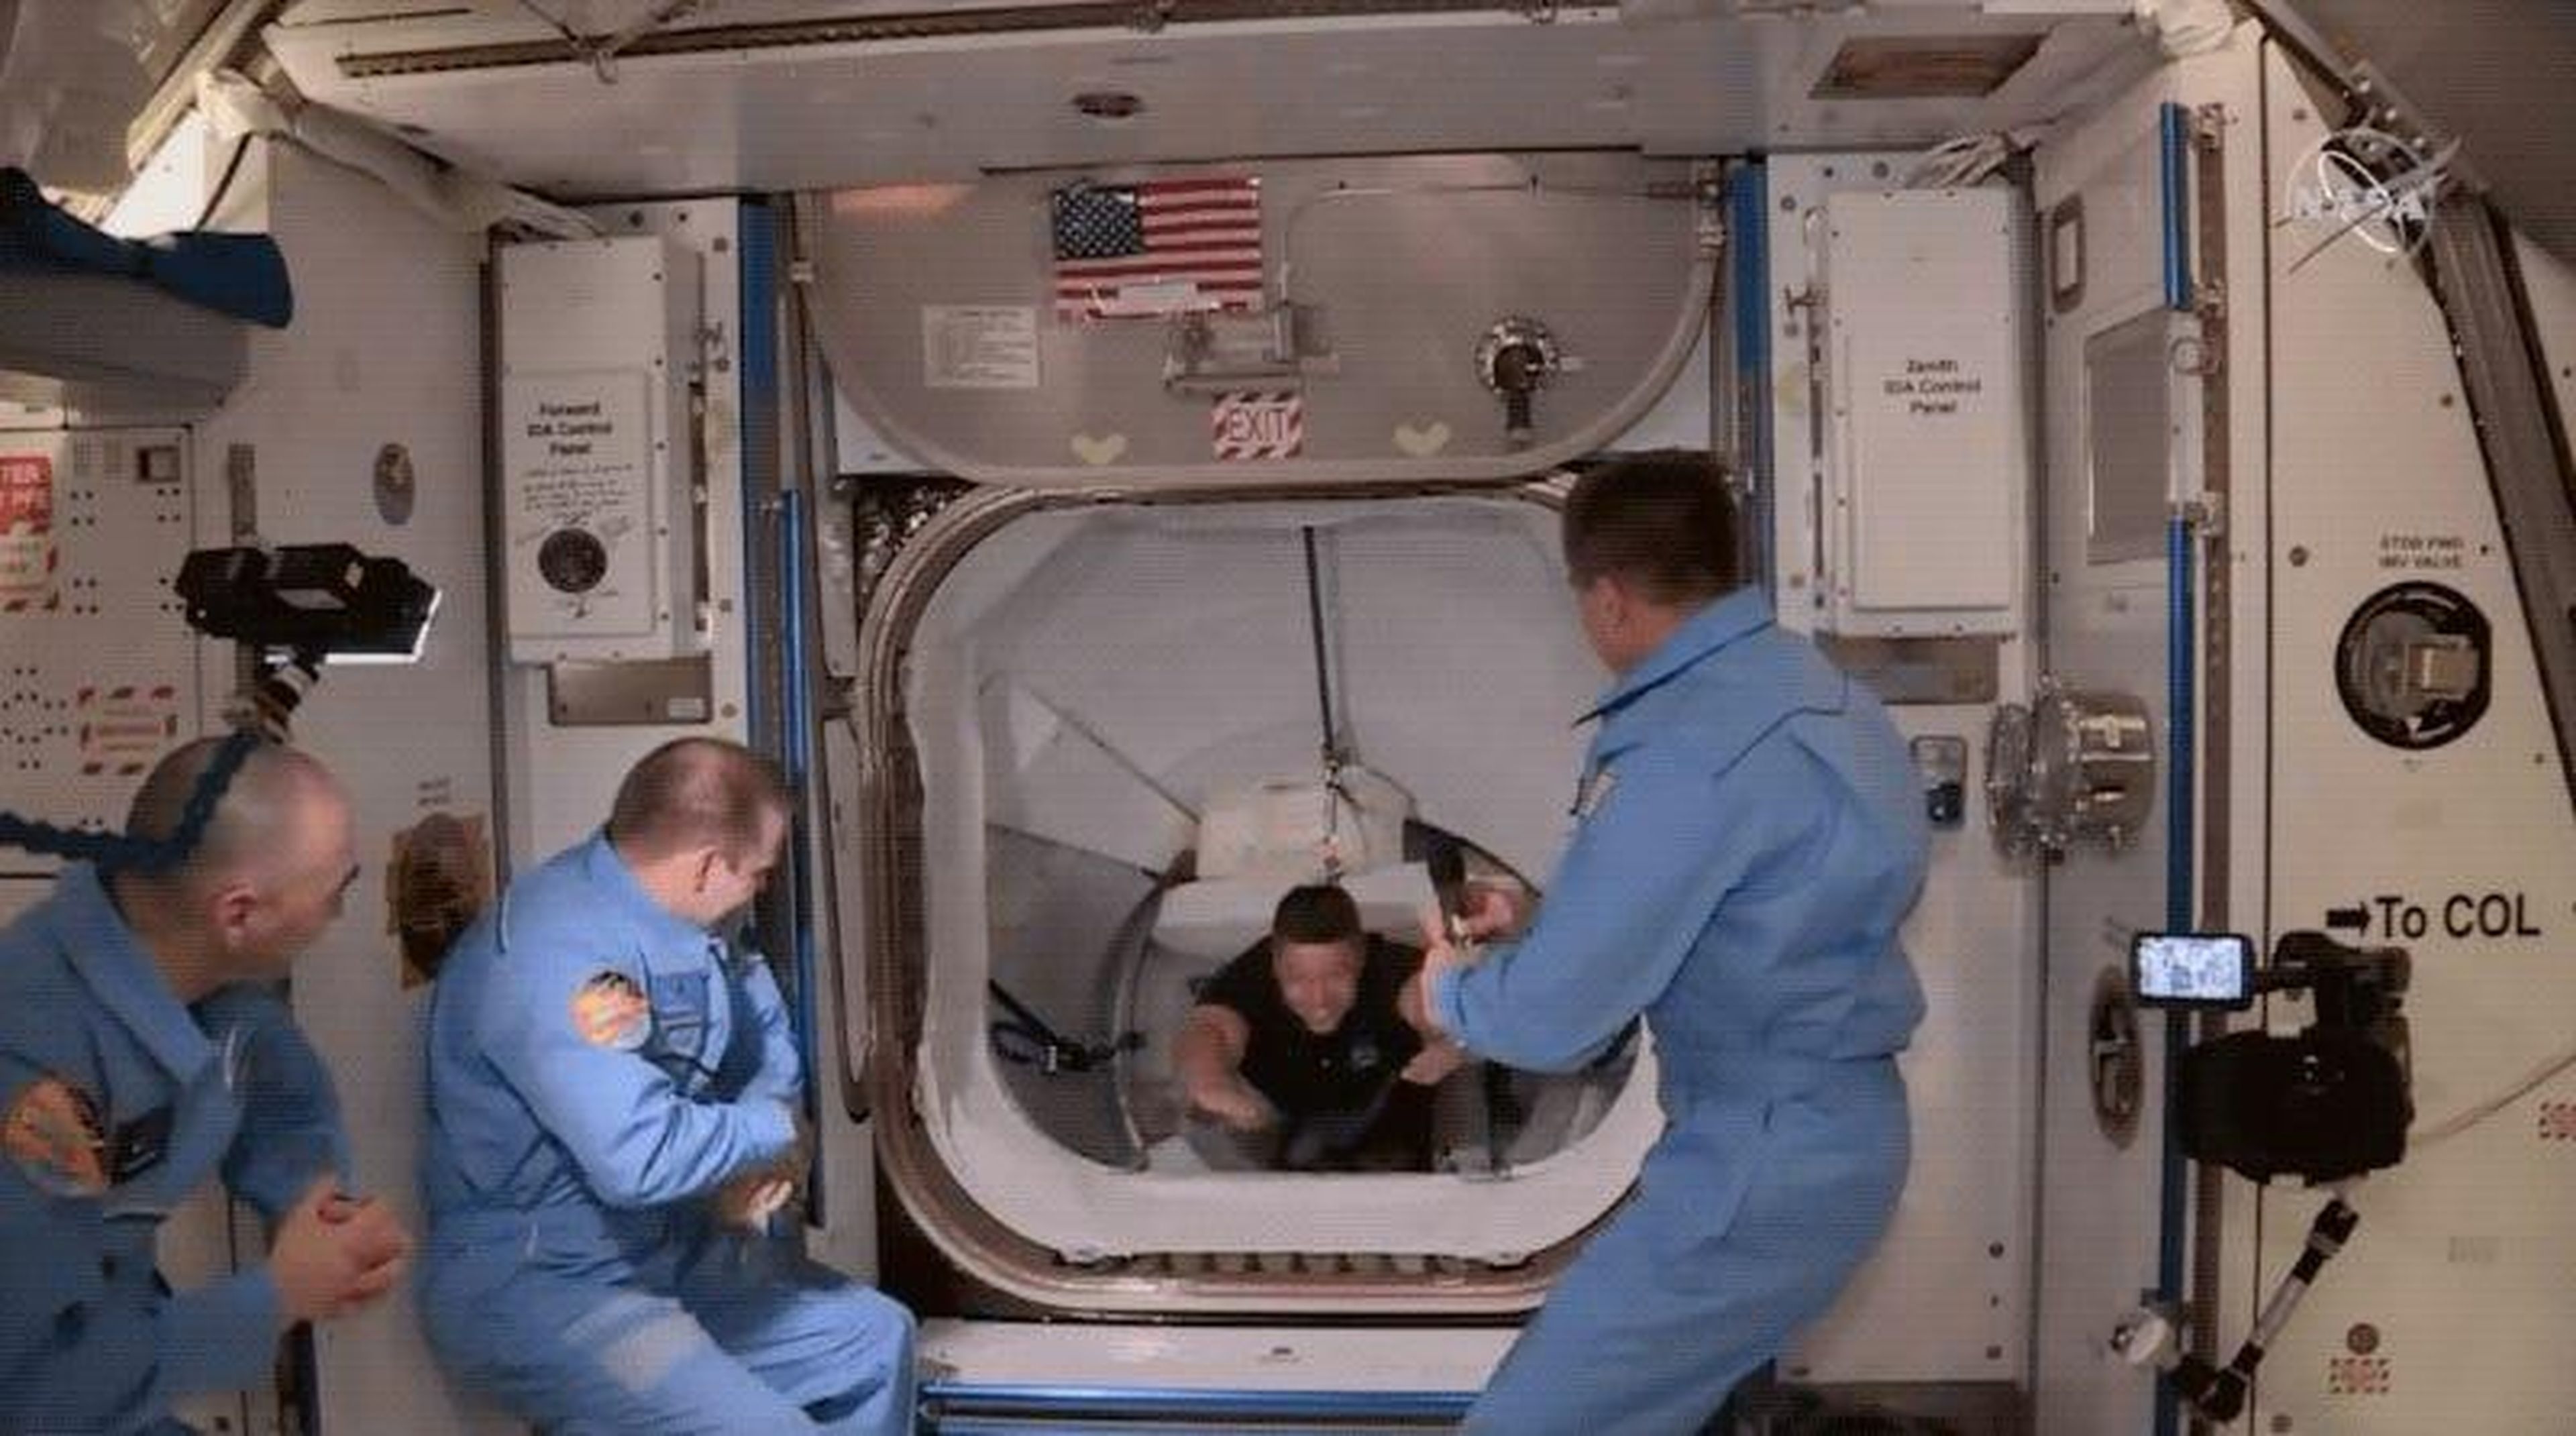 NASA astronauts Bob Behnken and Doug Hurley float into the International Space Station on May 31, 2020, after riding SpaceX's Crew Dragon spaceship to the orbiting laboratory.